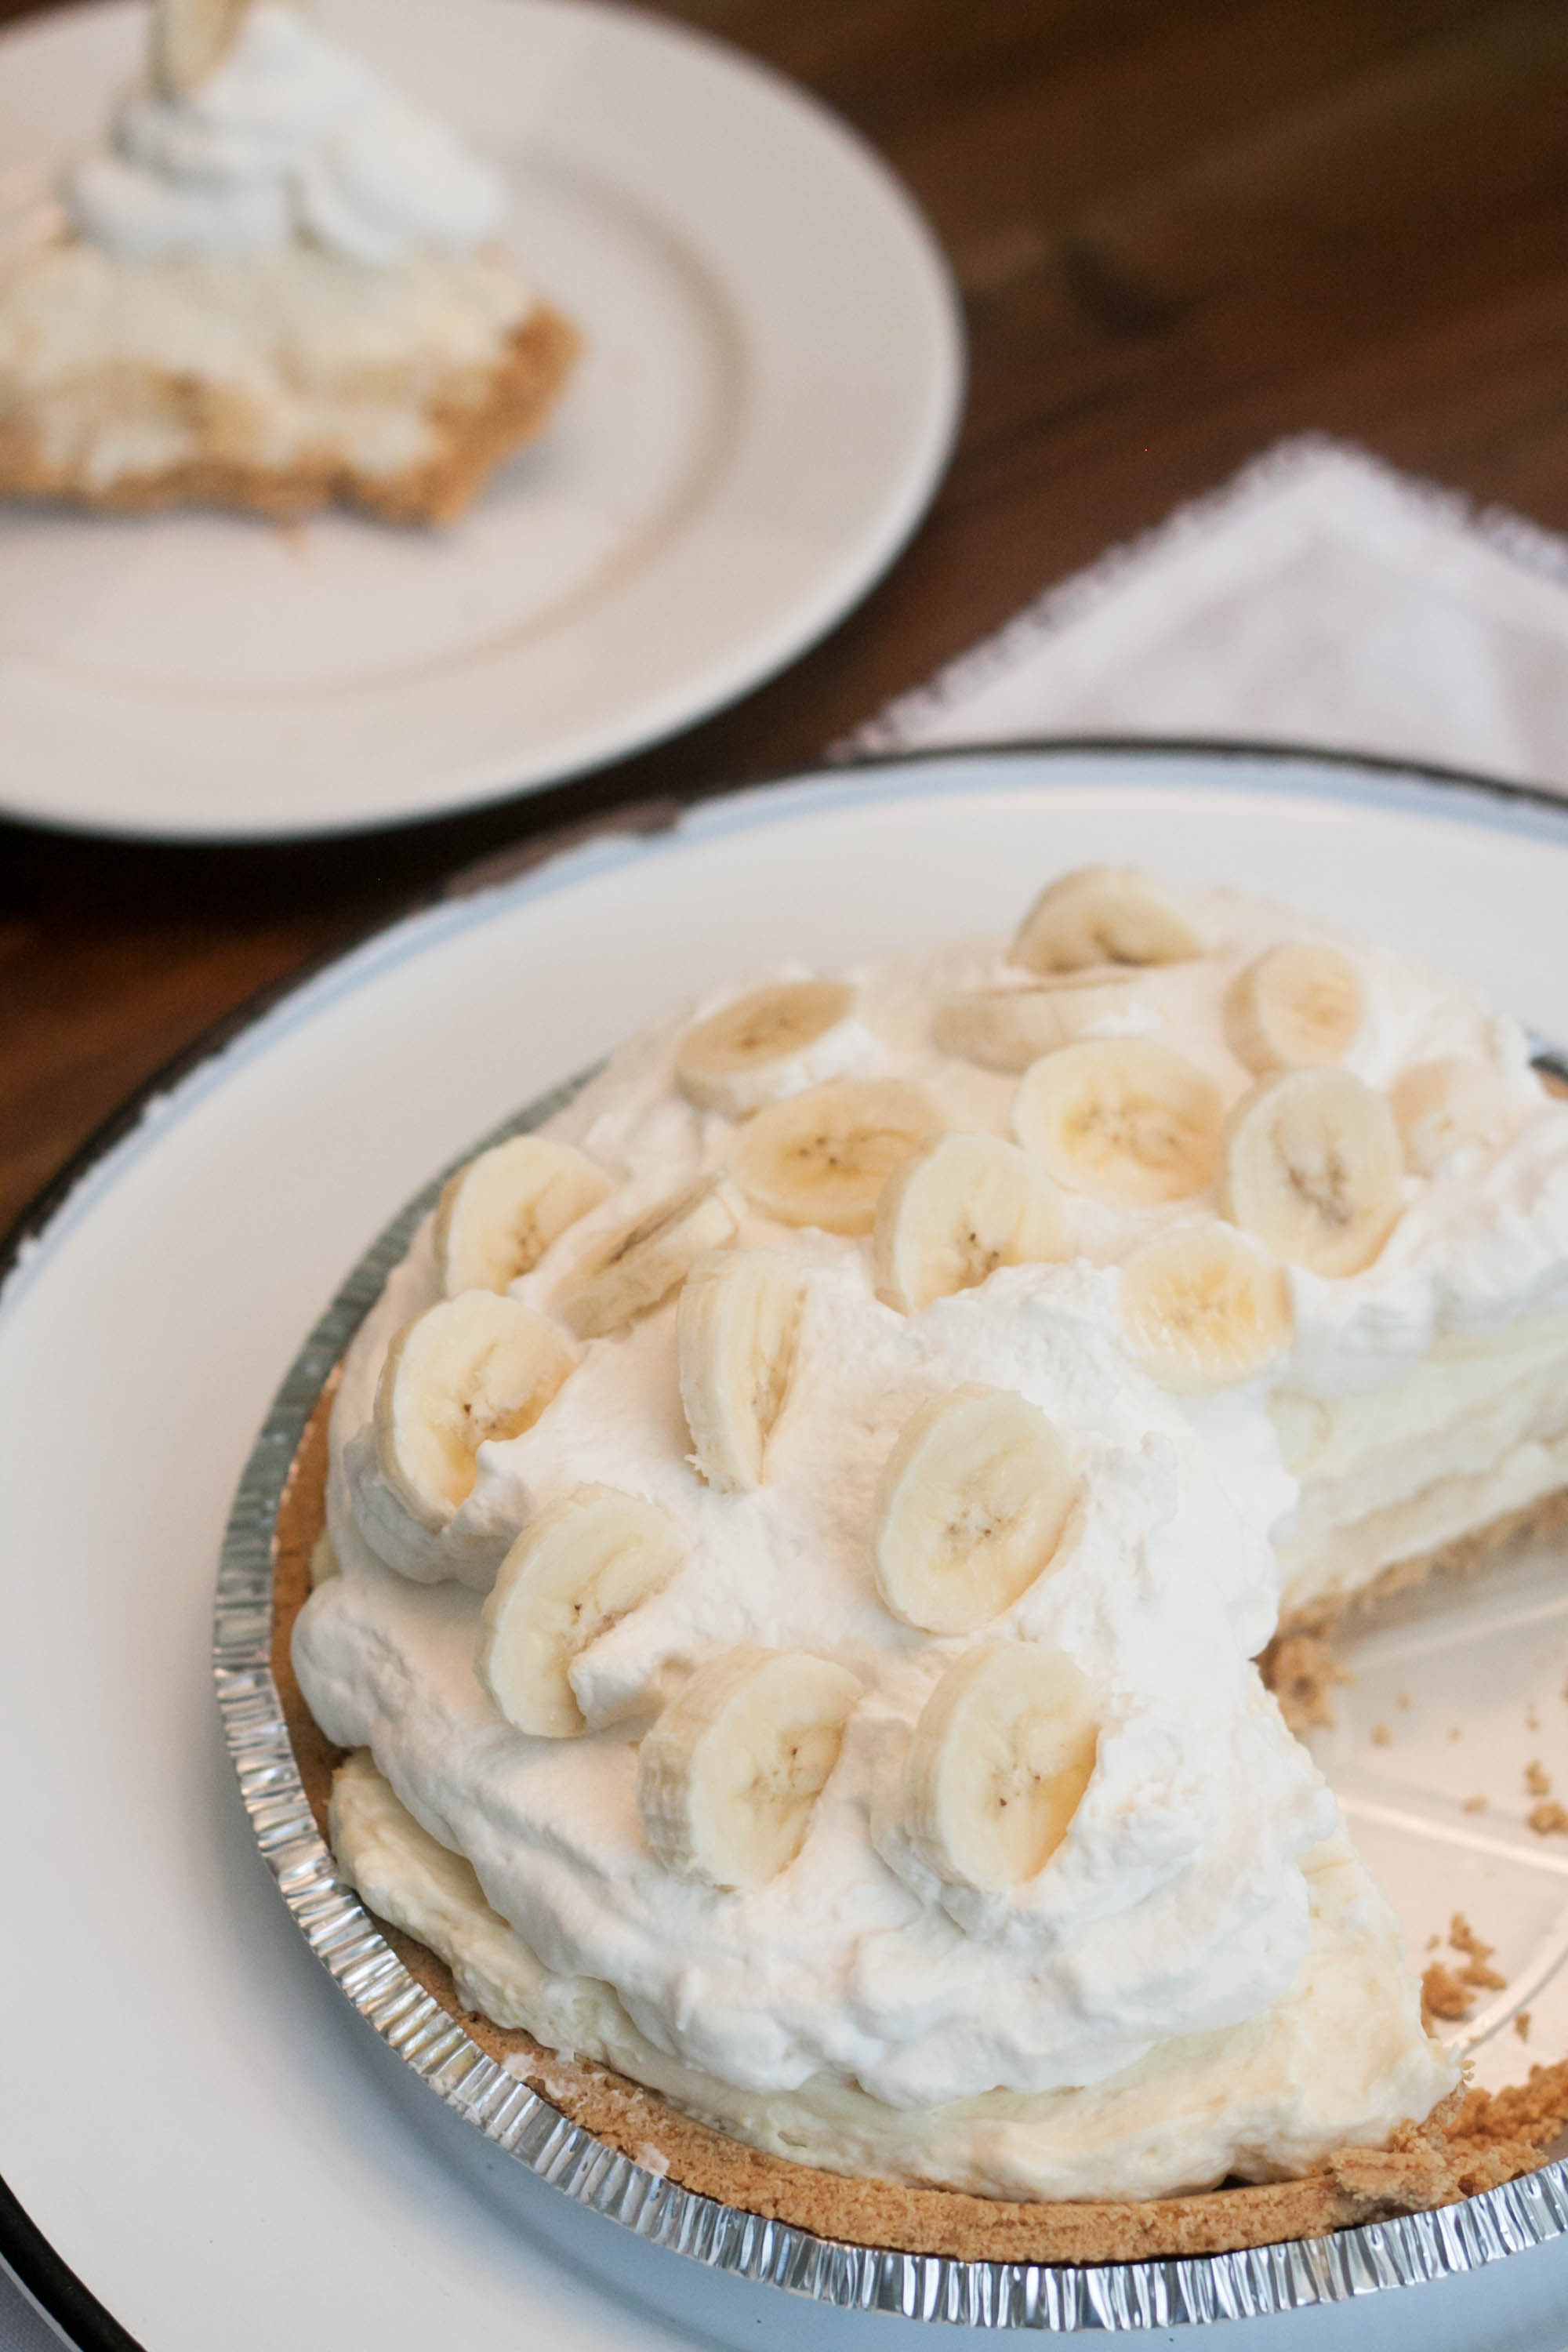 Looking for a banana cream pie recipe? This easy no-bake banana cream pie is perfect for a fast dessert. Whether you need a dessert for a picnic or potluck, dessert for guests or a simple weeknight dessert, this pie is the perfect choice.